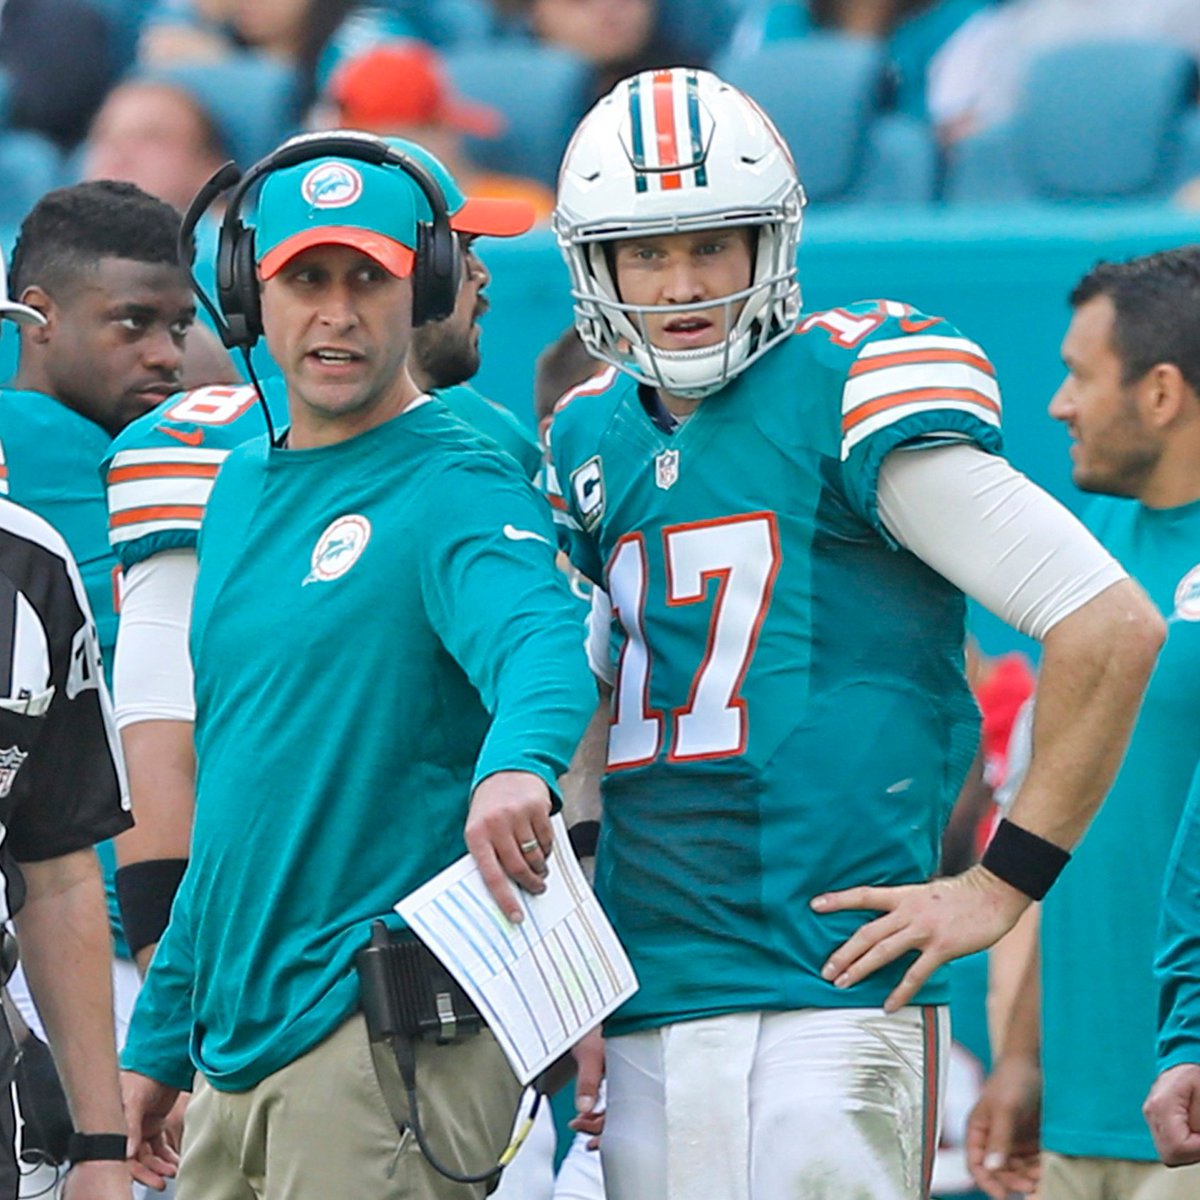 THREAD: Players with and without Adam Gase   Ryan Tannehill's careerW/Gase         Post Gase13-11   W-L      11-3207.3  Pass YPG   234.165.9   Comp%    69.936/21  TD/INT     31/7 7.5    Yds/Att     9.0